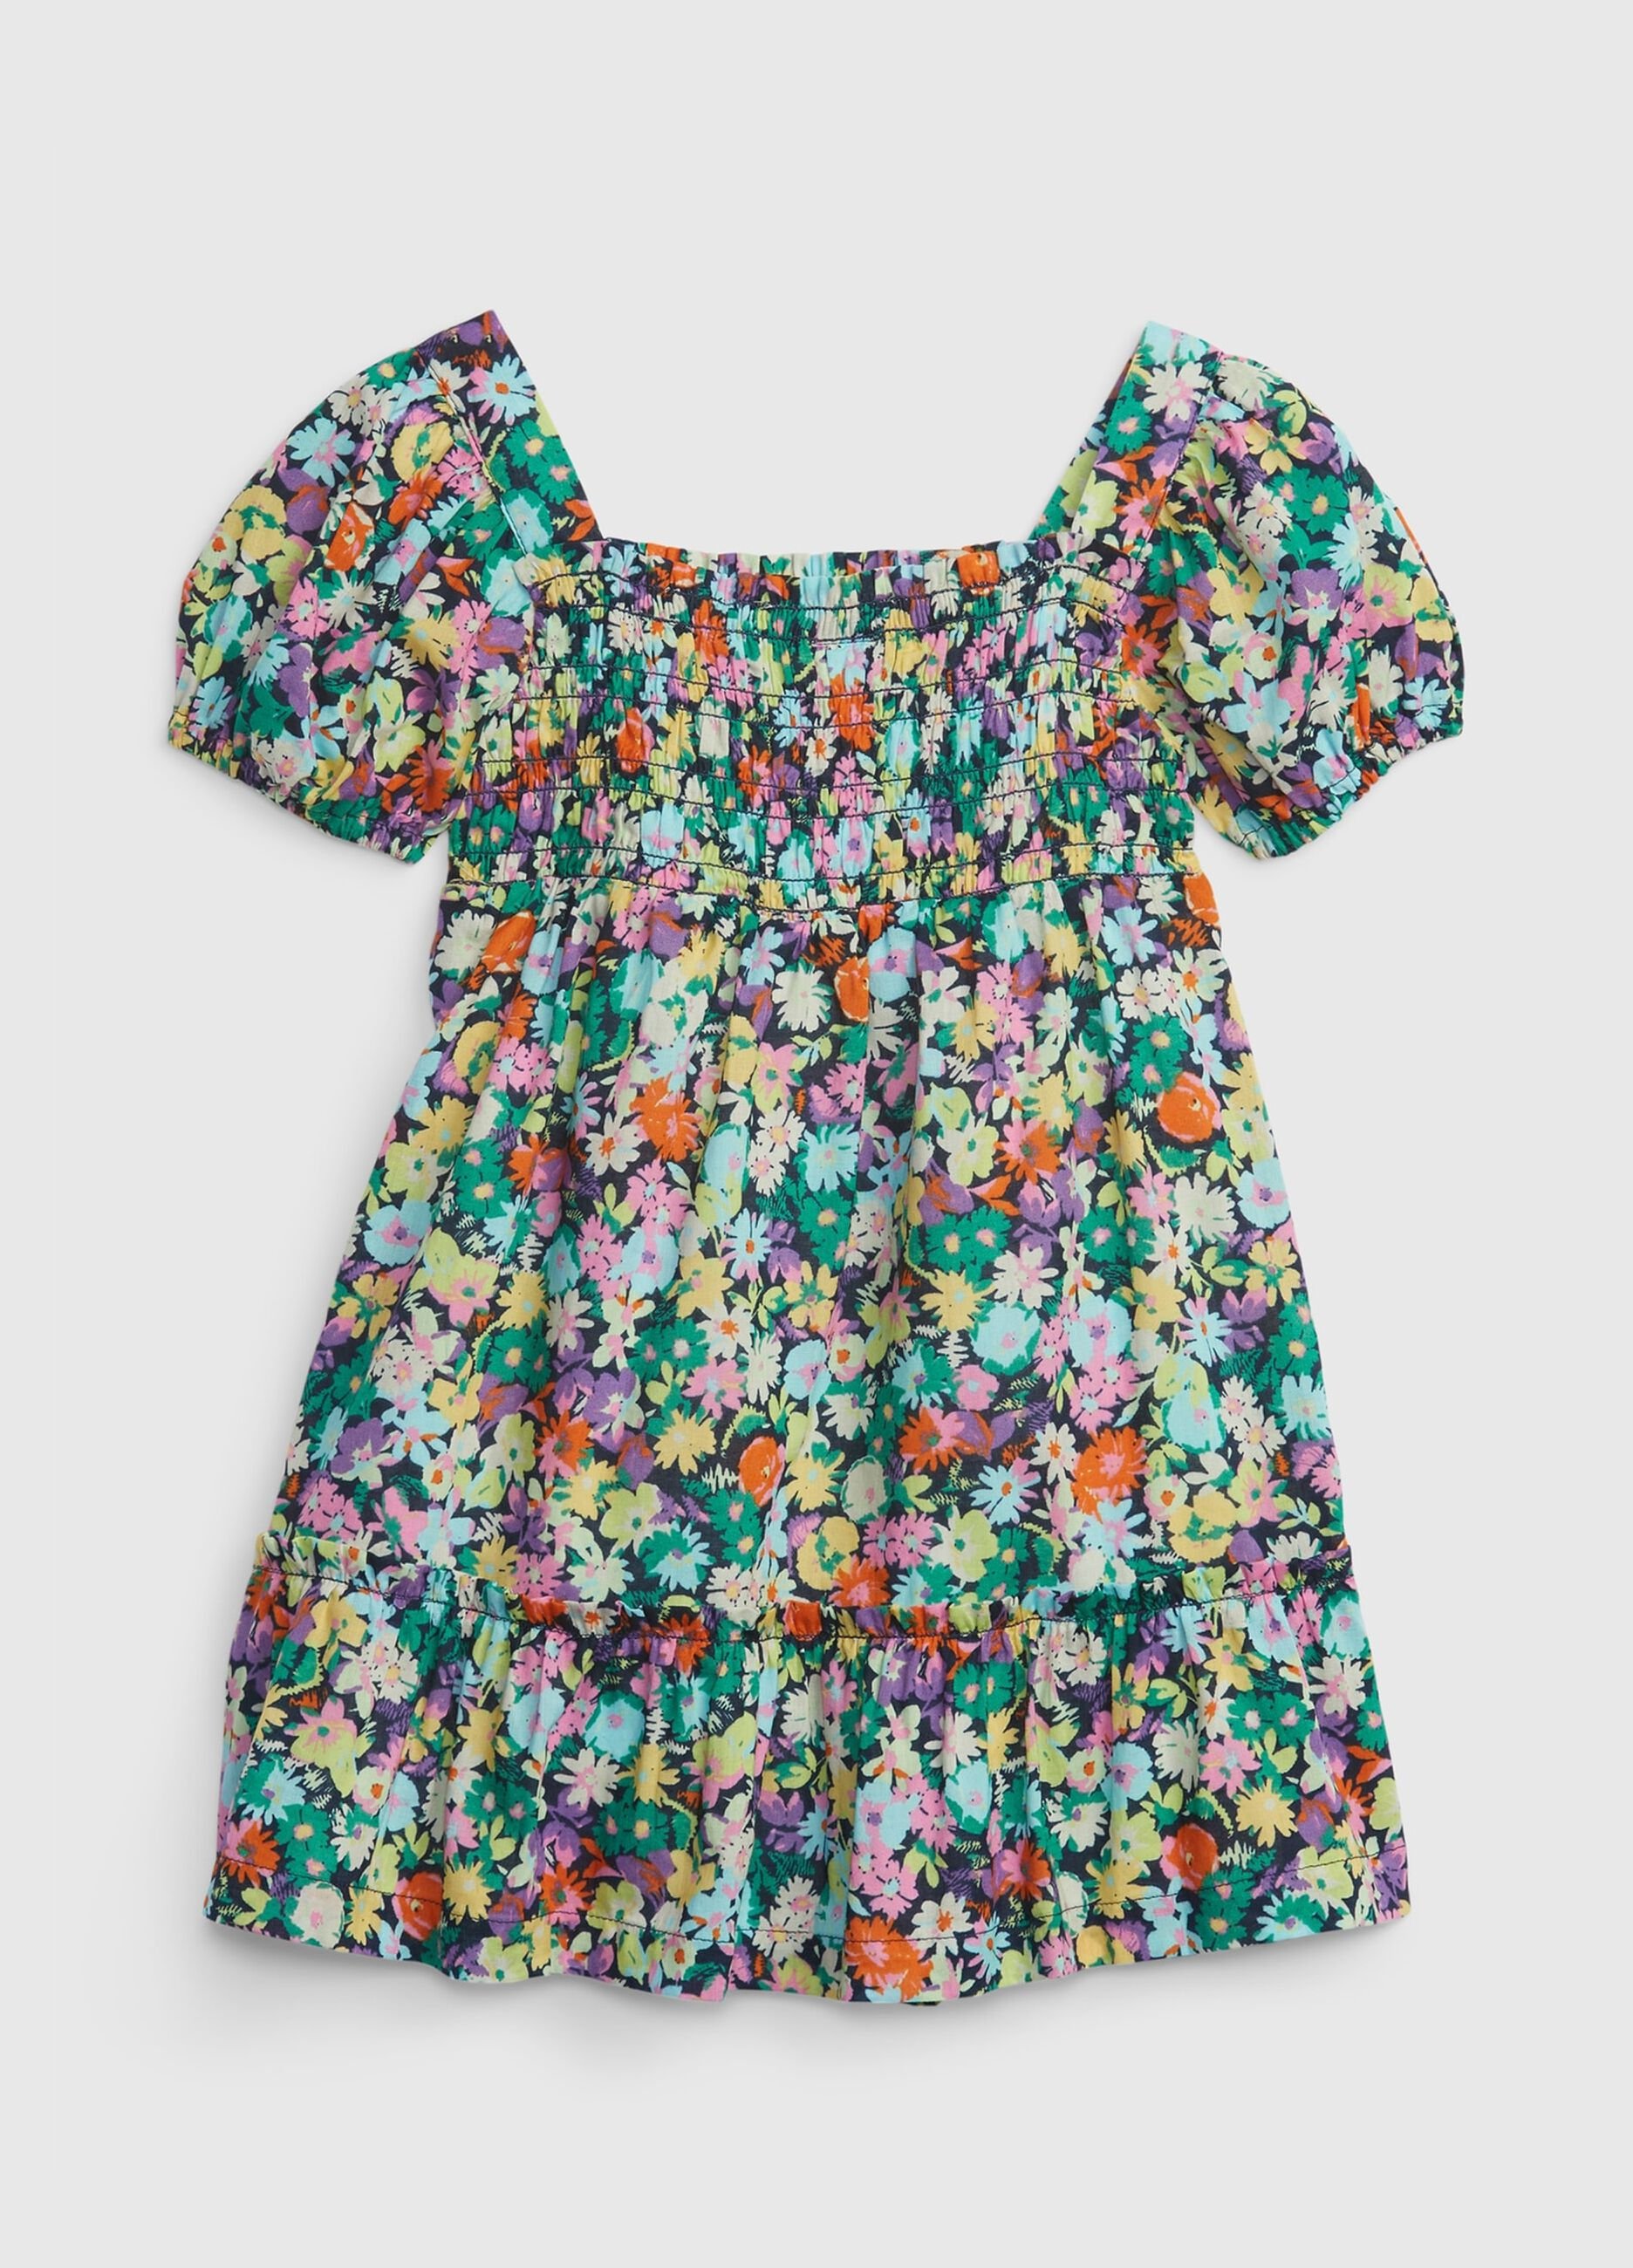 Dress with floral print.